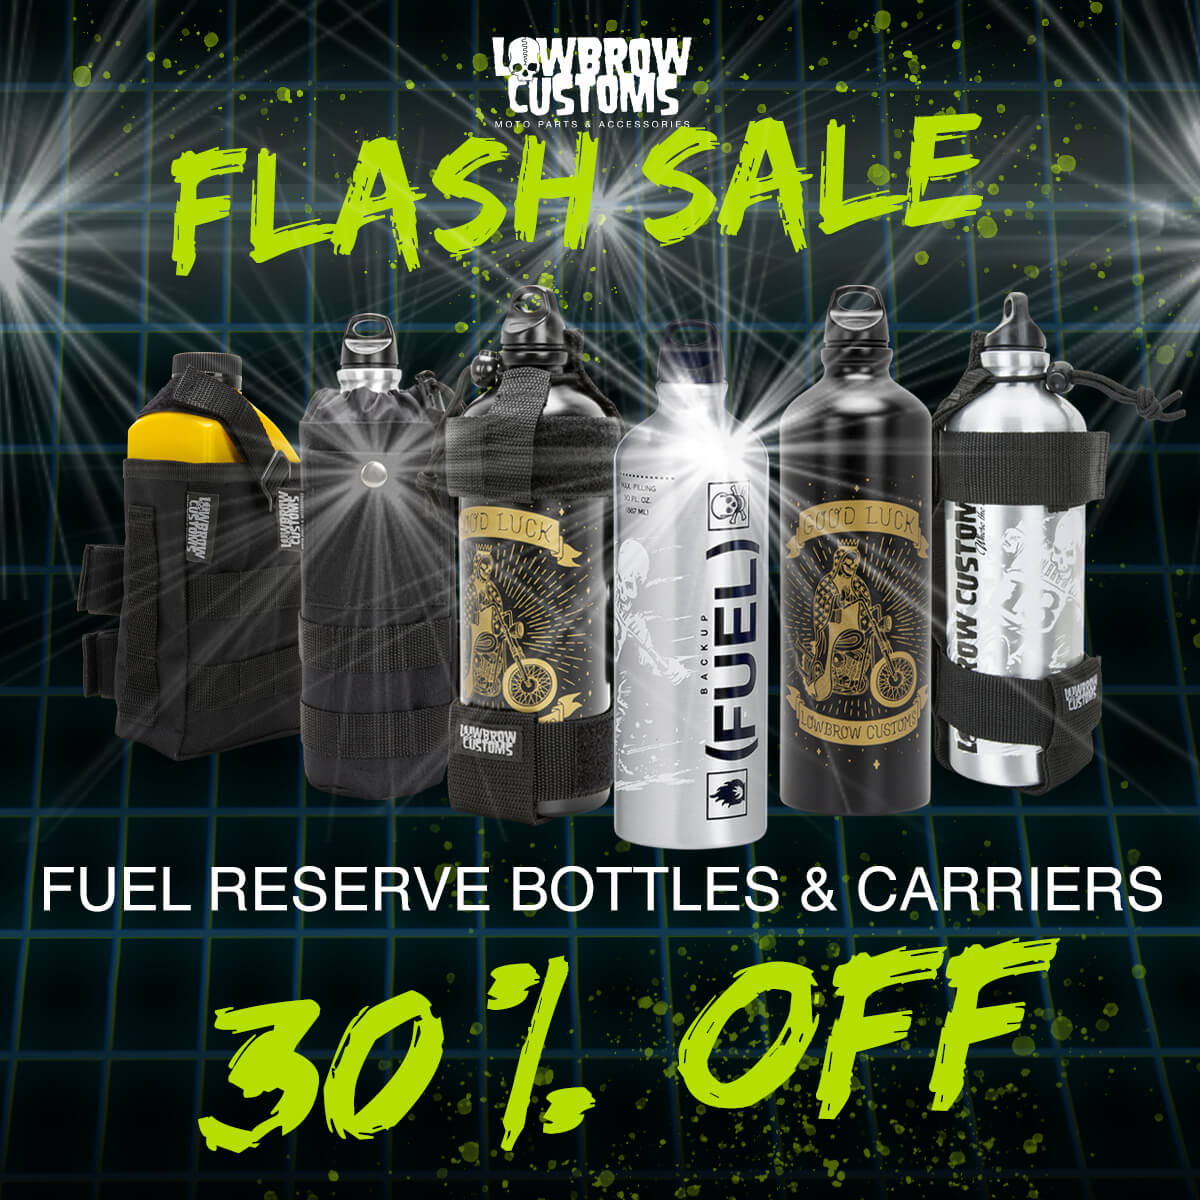 Last chance to get in on the flash sale! Fuel reserve bottles and carriers... there when ya need it most. #lowbrowcustoms #lowbrow #choppershit #choppers #chopshit